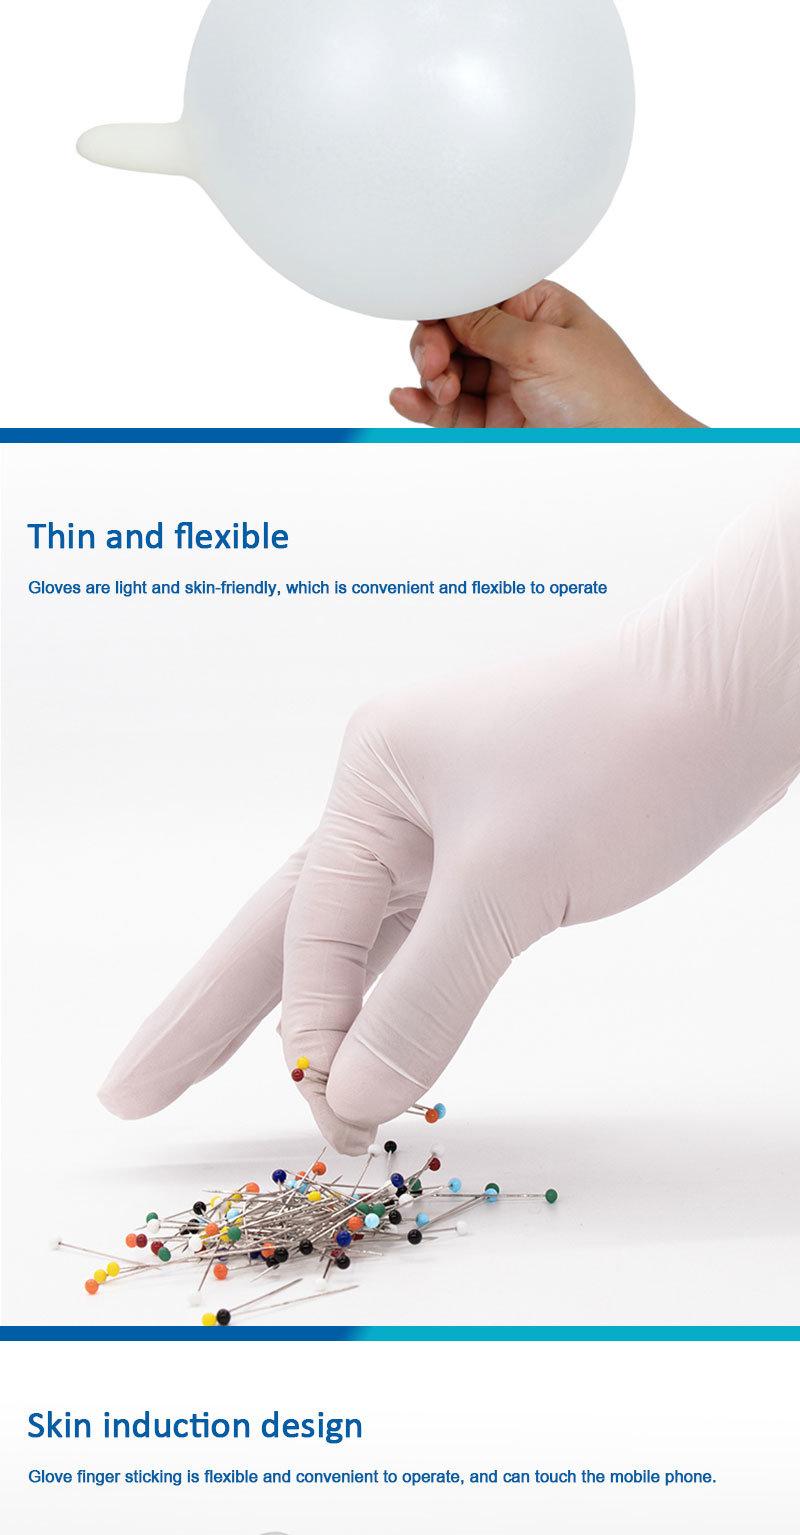 Latex Gloves Non-Sterile Food Safe Latex Free Disposable Protective Examination with Latex Hand PVC Gloves Powder Free